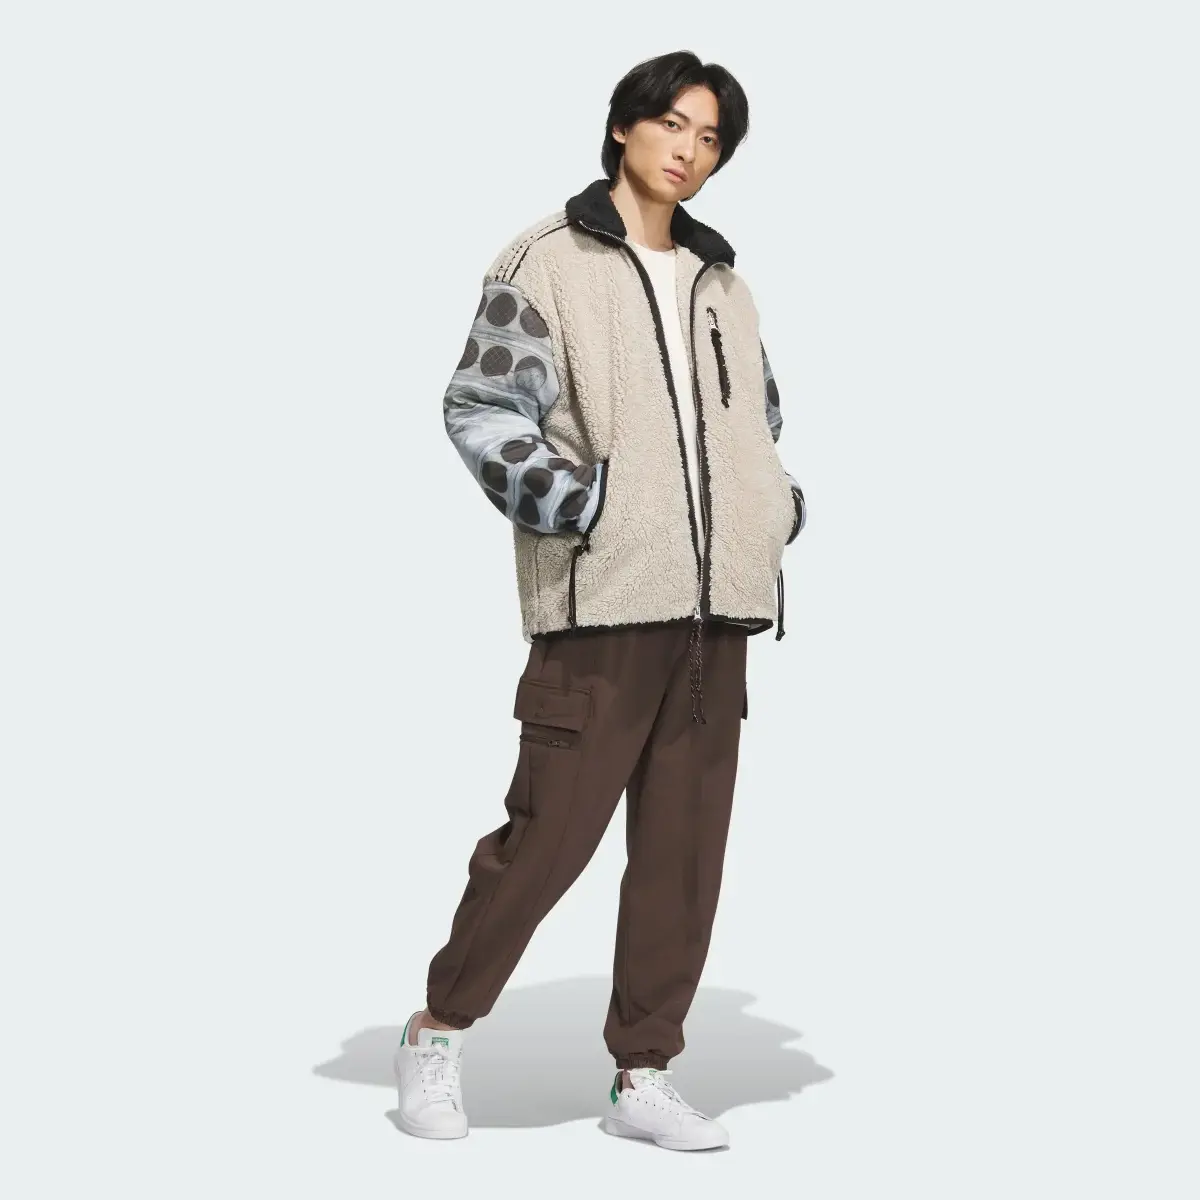 Adidas Bluza Song for the Mute Fleece (Gender Neutral). 3